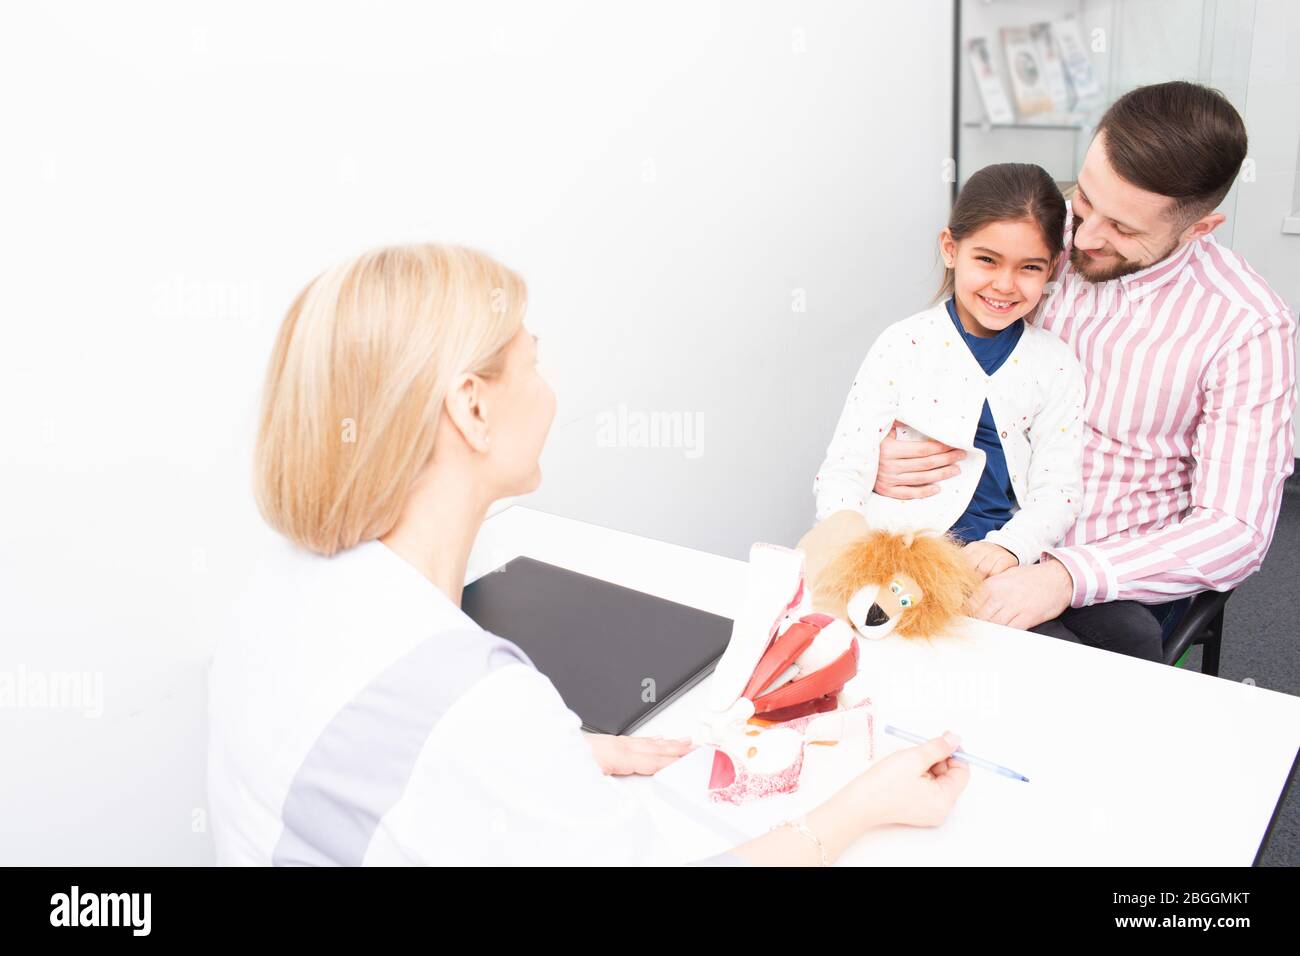 Dad and his daughter in office of an ophthalmologist. Girl smiling and not afraid of eye test. Optometrist consultation Stock Photo